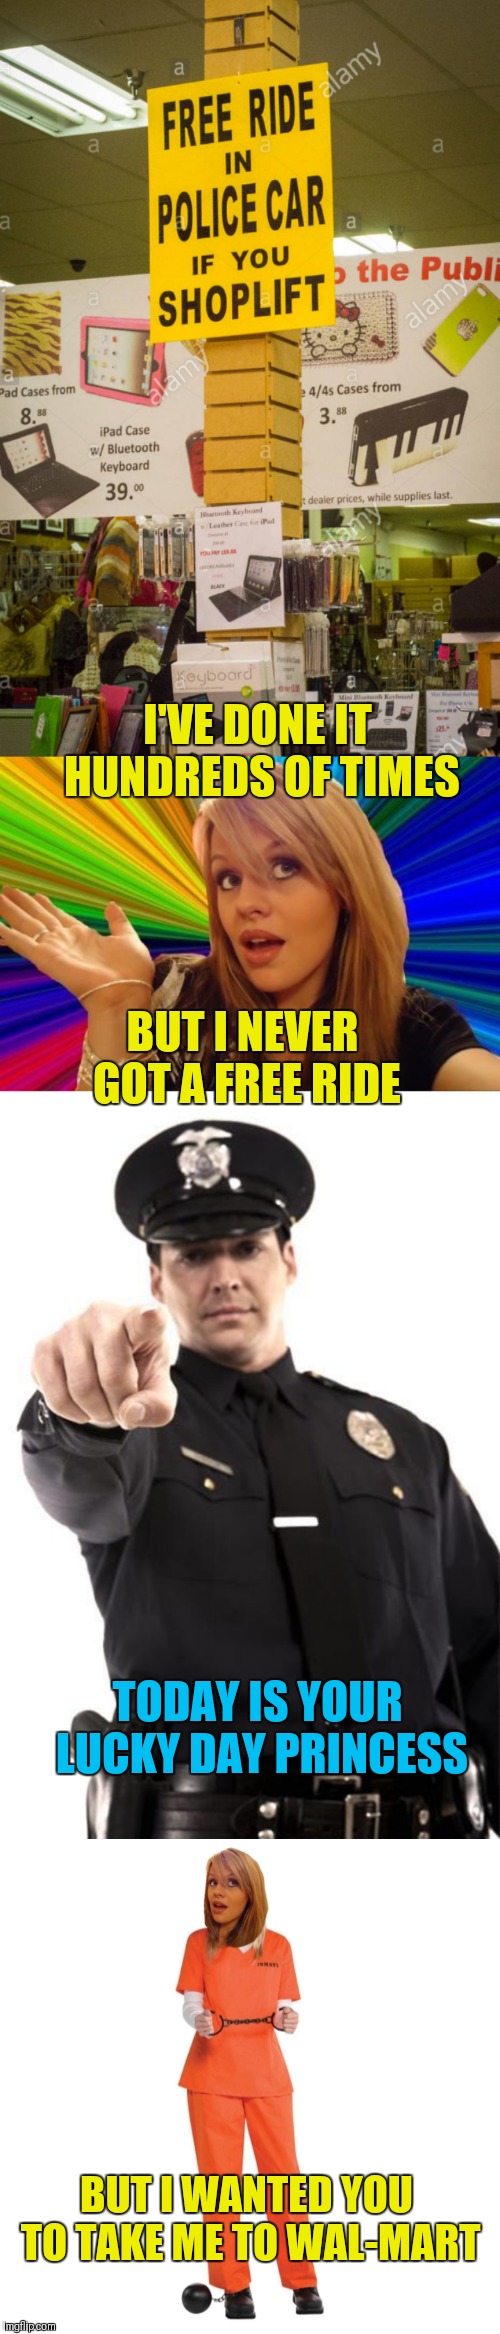 I want a refund! | I'VE DONE IT HUNDREDS OF TIMES; BUT I NEVER GOT A FREE RIDE; TODAY IS YOUR LUCKY DAY PRINCESS; BUT I WANTED YOU TO TAKE ME TO WAL-MART | image tagged in police,memes,dumb blonde,funny,walmart,44colt | made w/ Imgflip meme maker